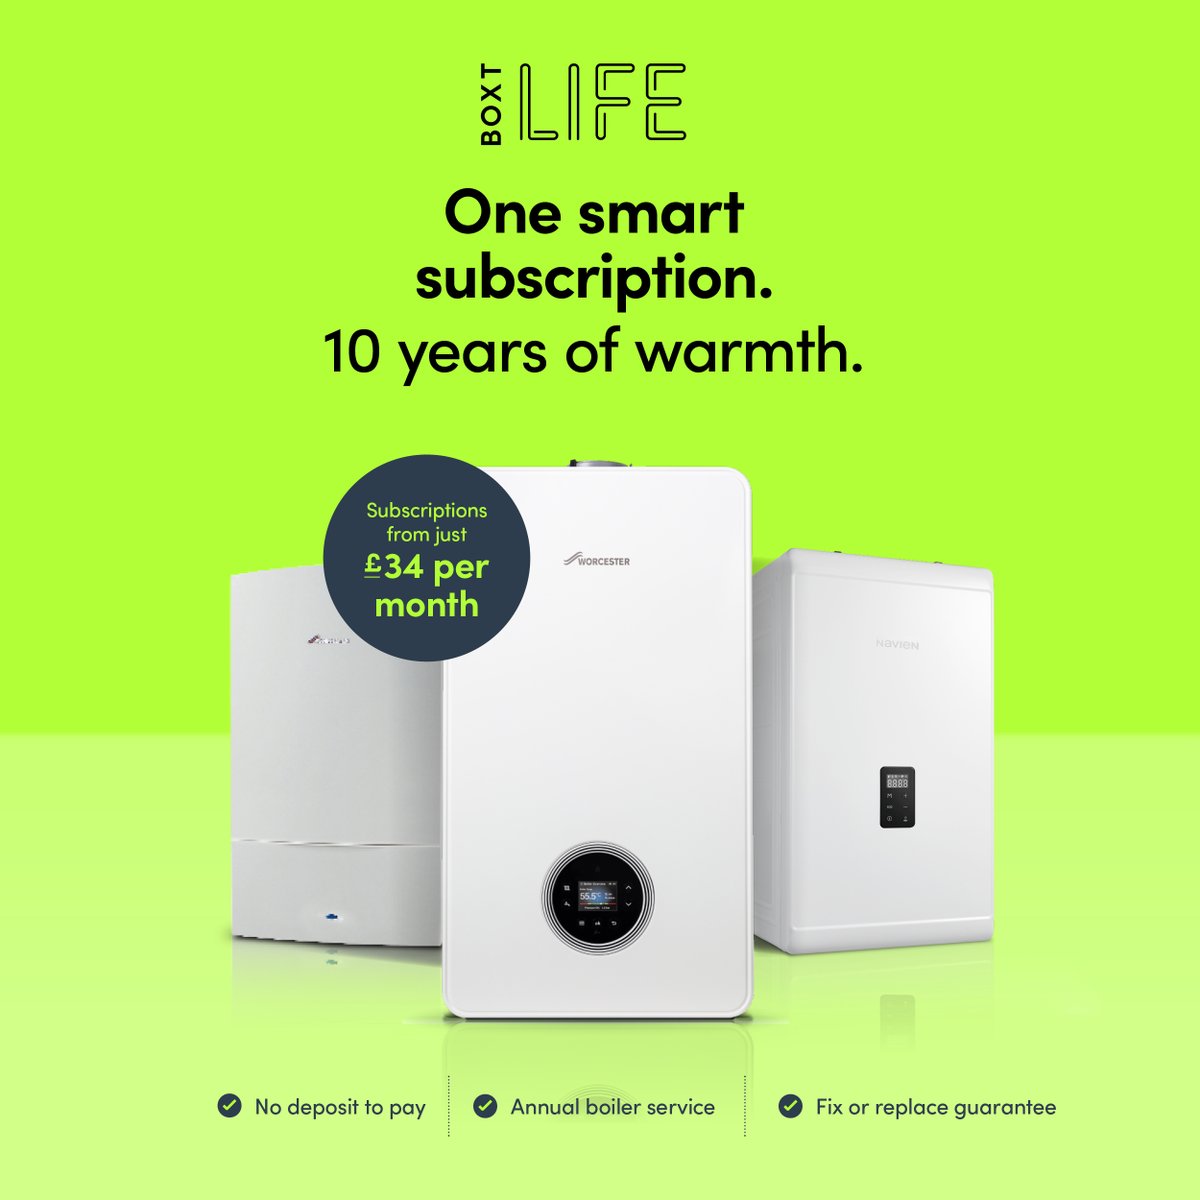 Looking for a more affordable way to upgrade your home heating system? BOXT Life is an all-in-one boiler subscription offering new boiler installation, plus unlimited repairs, replacement & servicing from only £34 a month. Total peace of mind at a pocket friendly price.